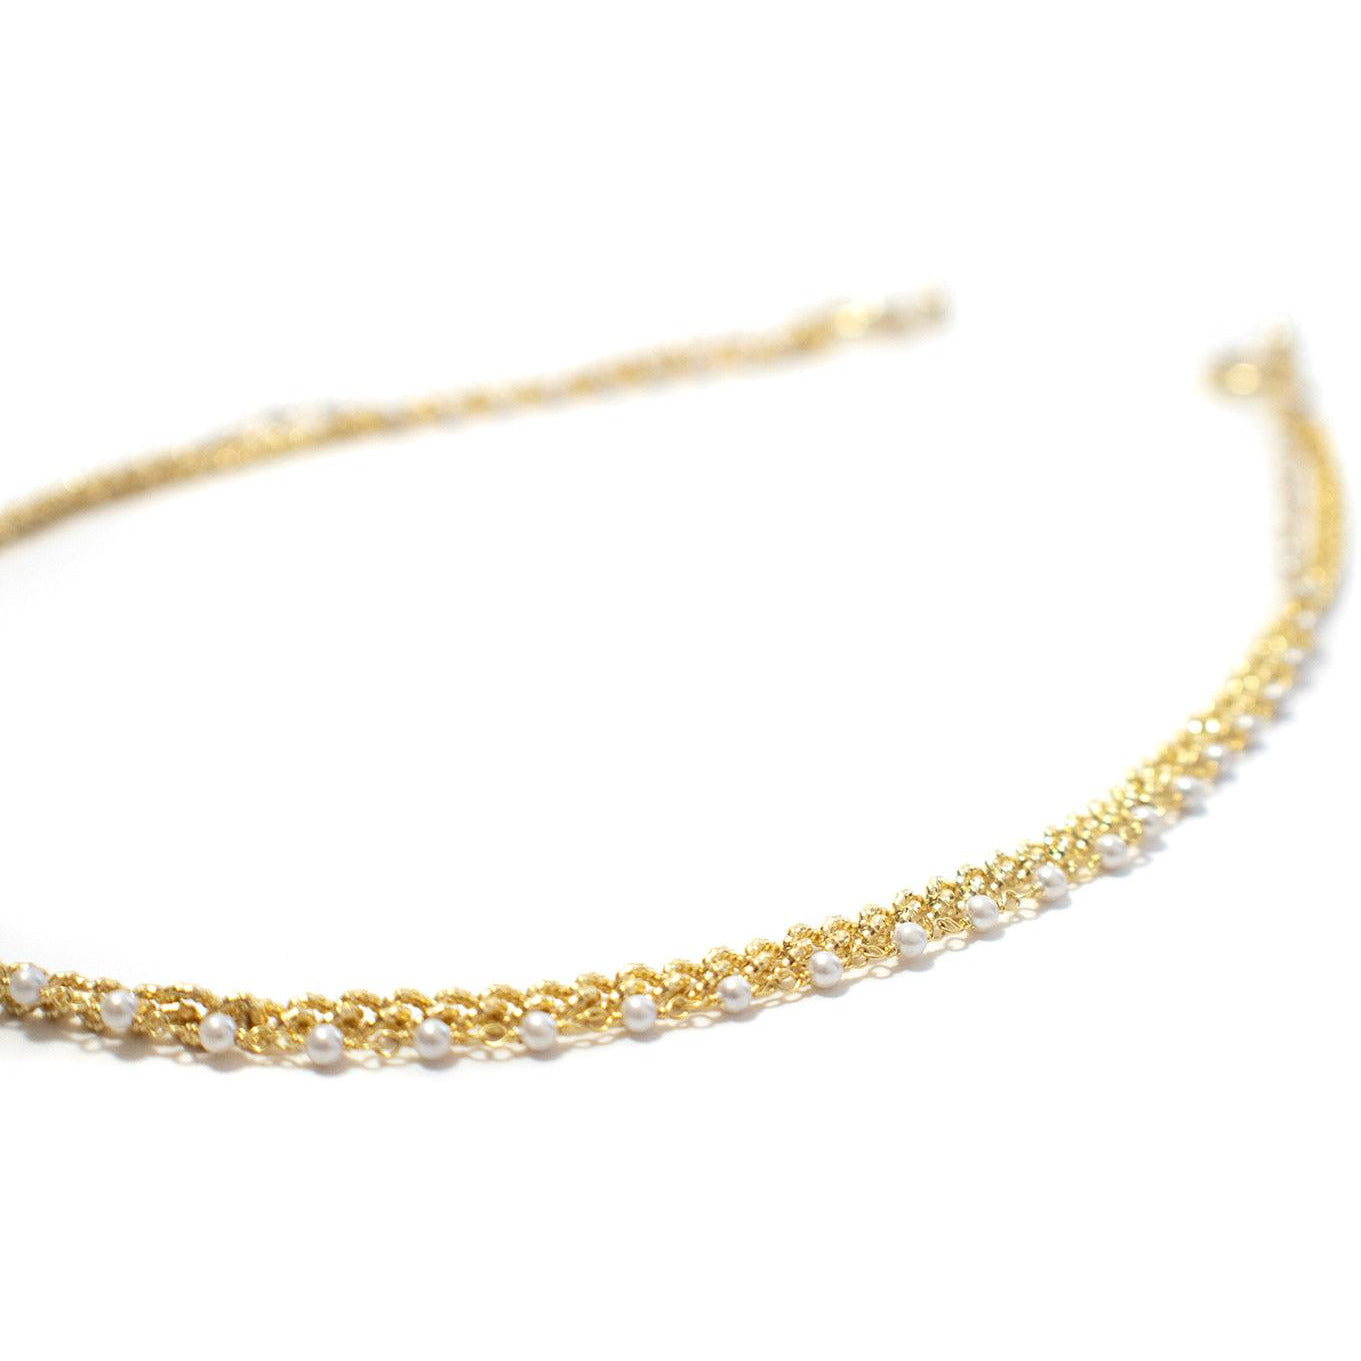 Layered Gold Chain with Pearl String from Vint & York